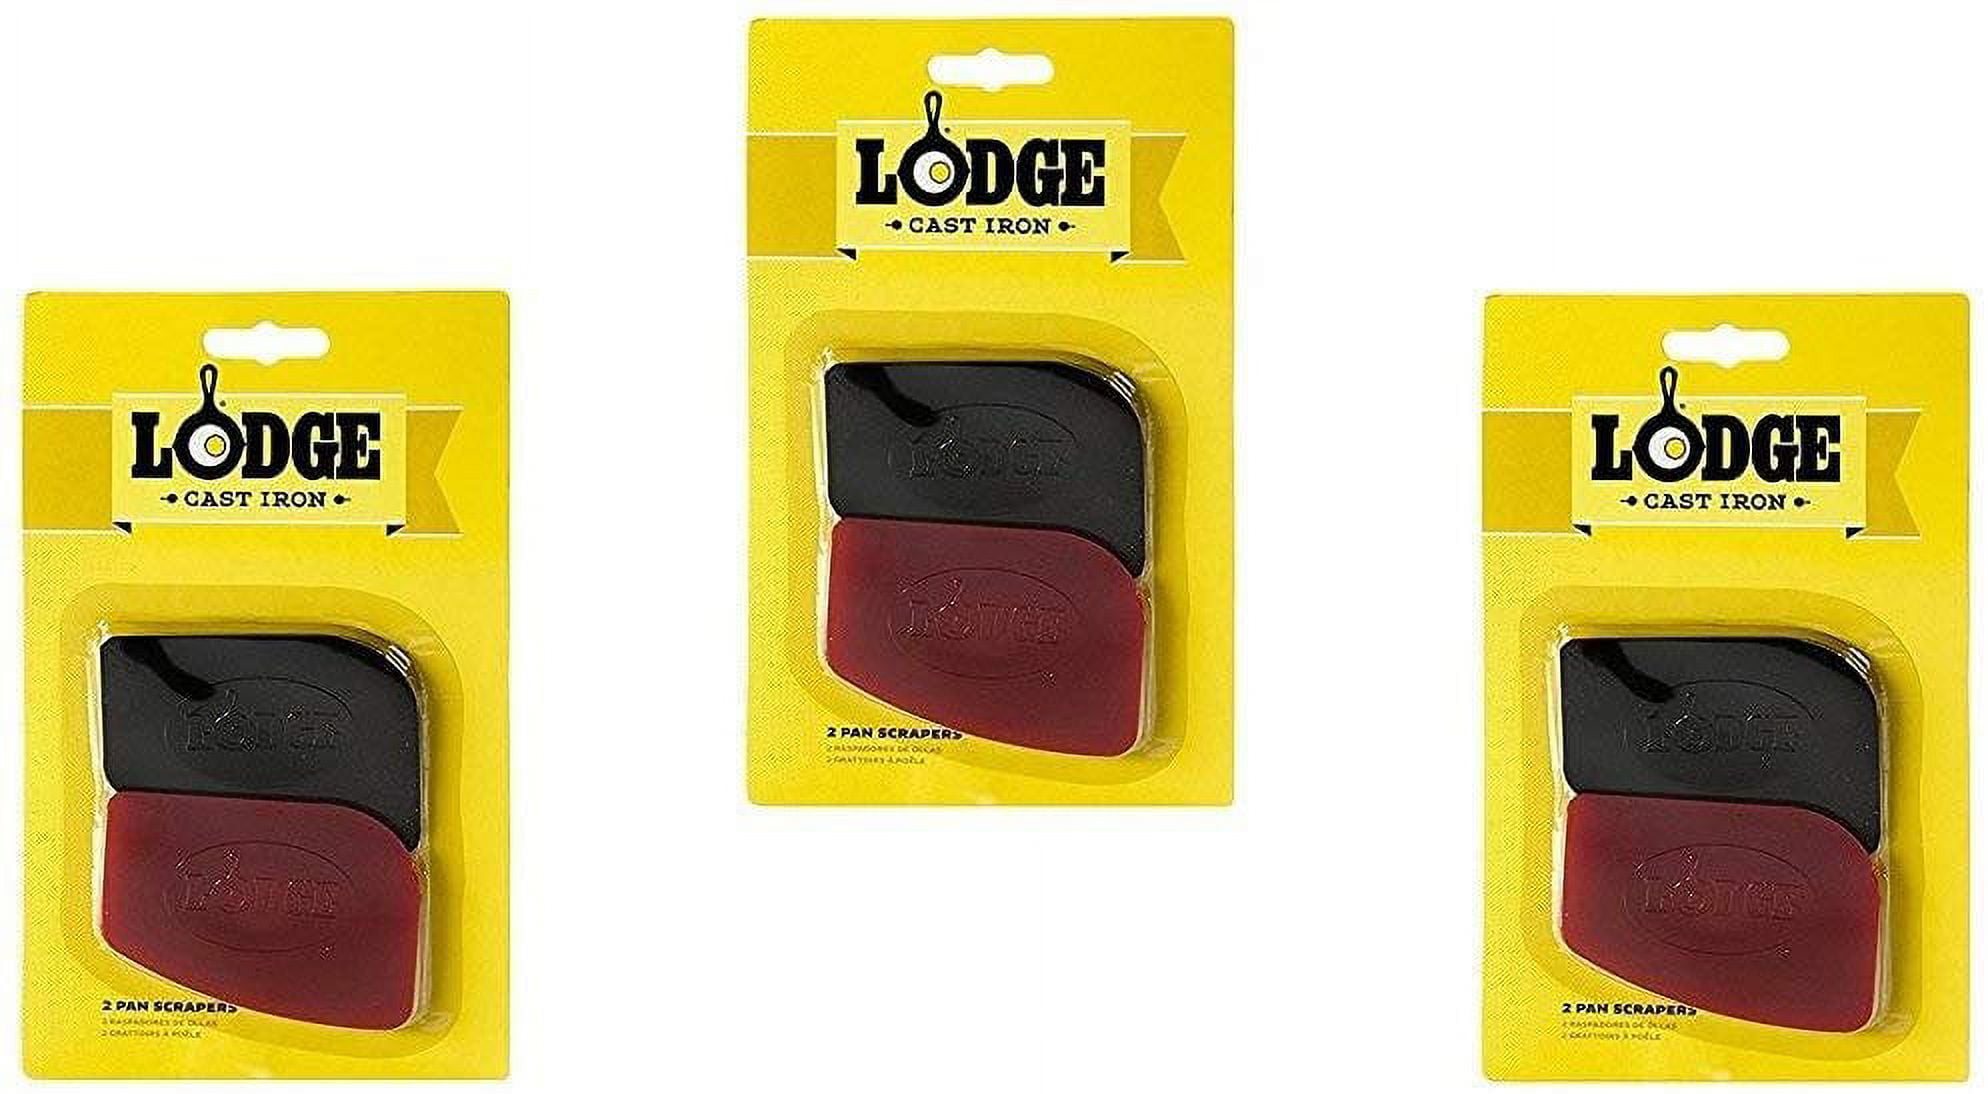 Lodge Polycarbonate Red and Black Pan Scraper, Set of 4, Size: 2 Pack